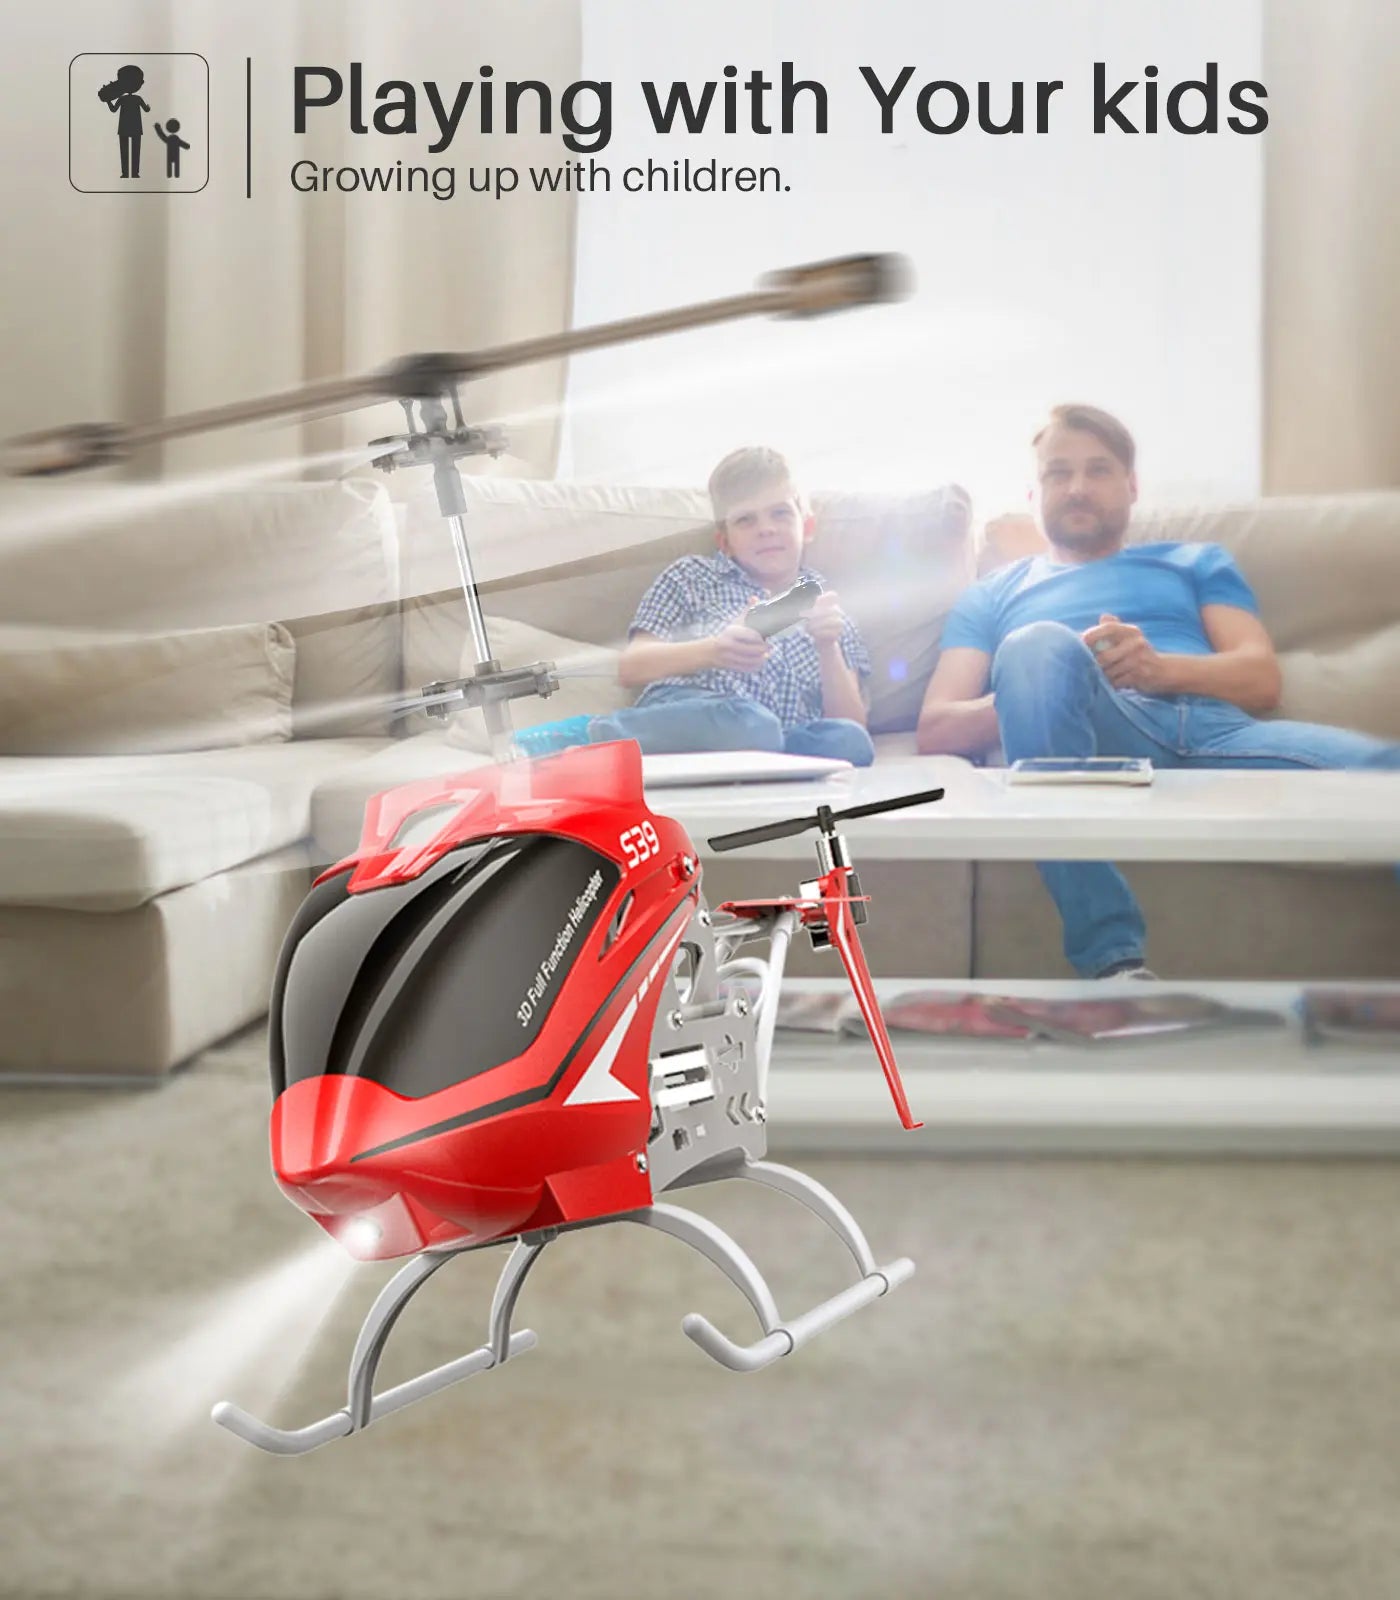 SYMA S39 RC Helicopter, Playing with Your Kids Growing up with Children: $9